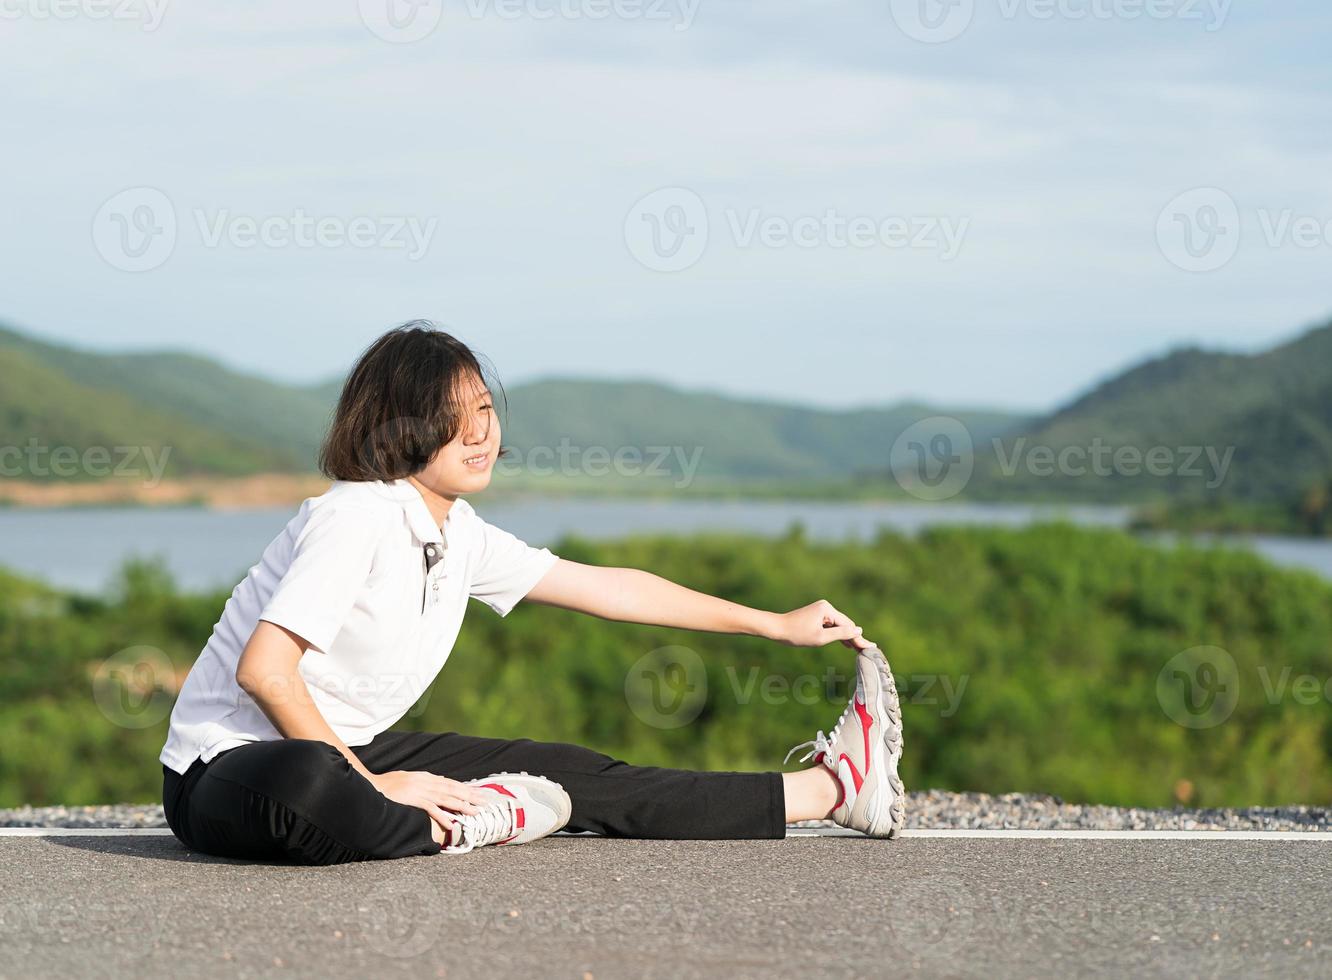 Woman preparing for jogging outdoor photo